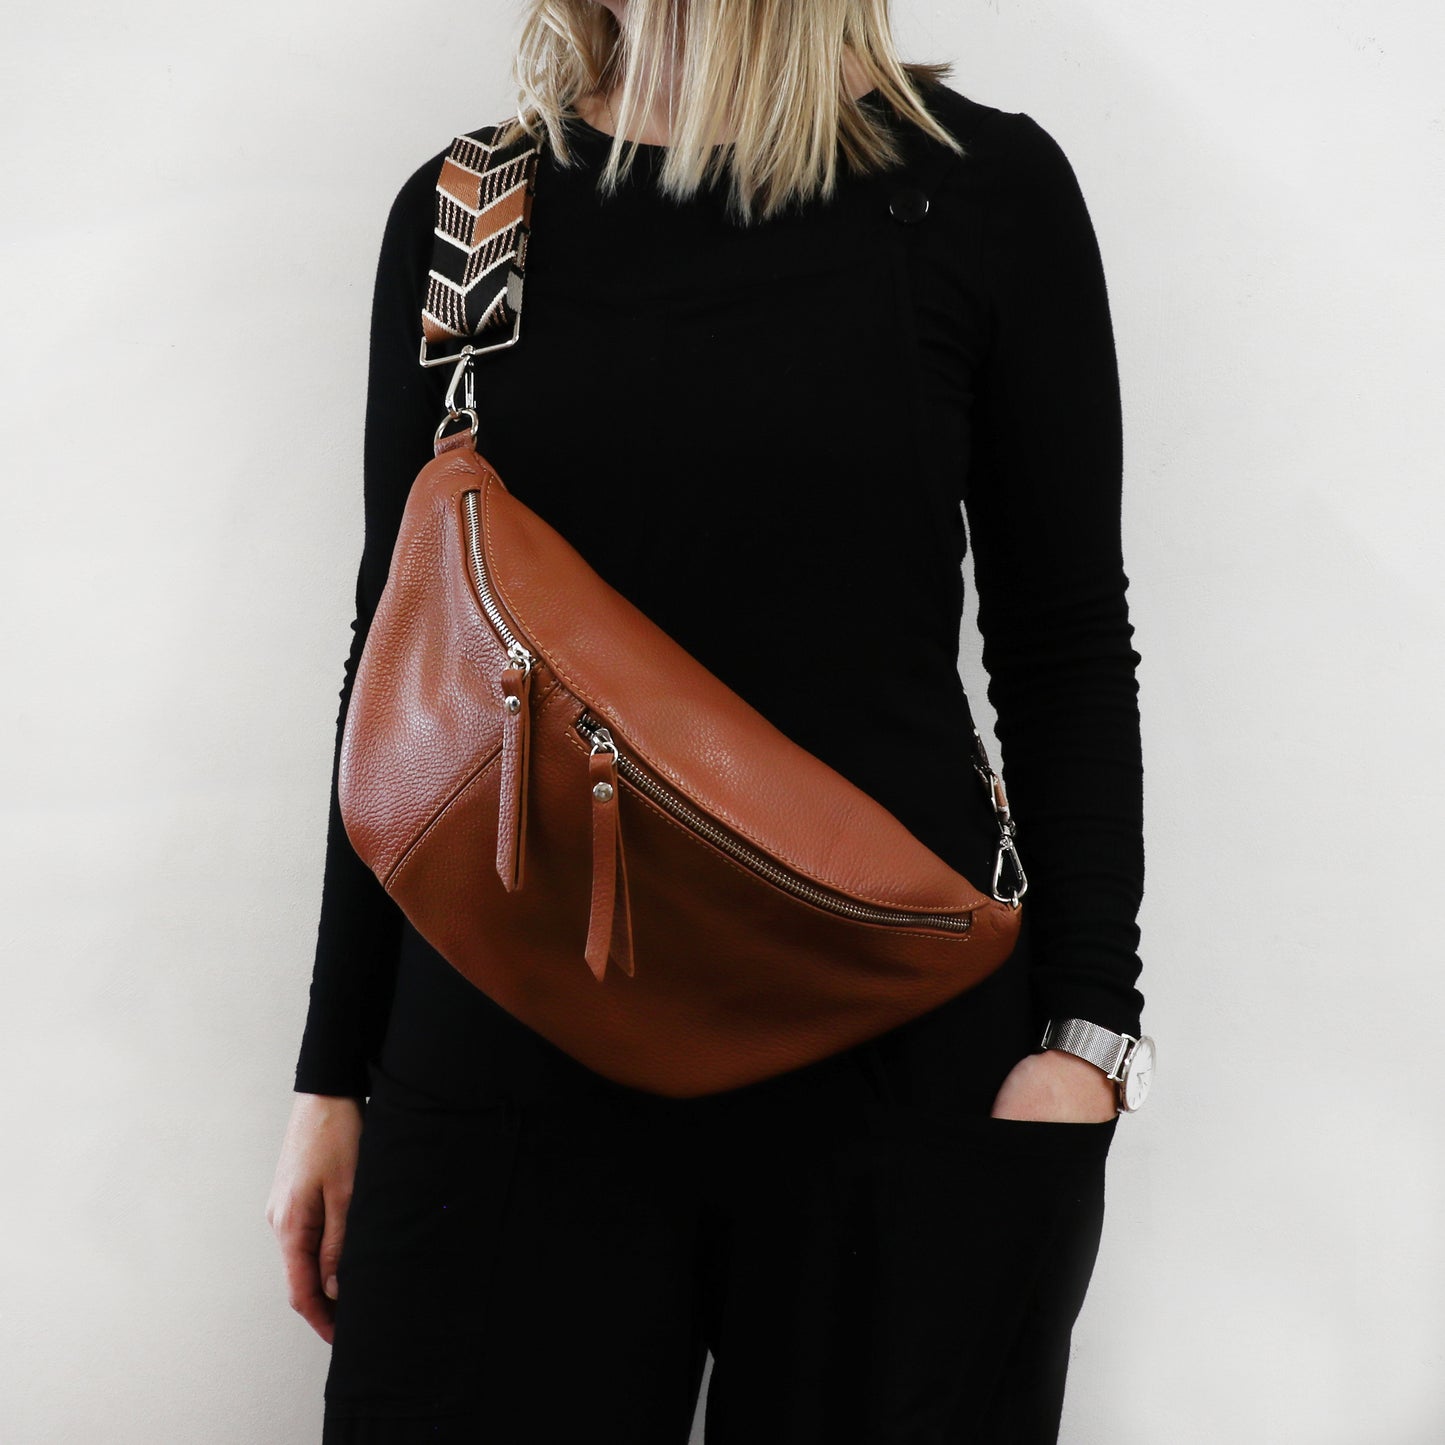 Large Leather Sling Bag with Patterned Strap  - Tan